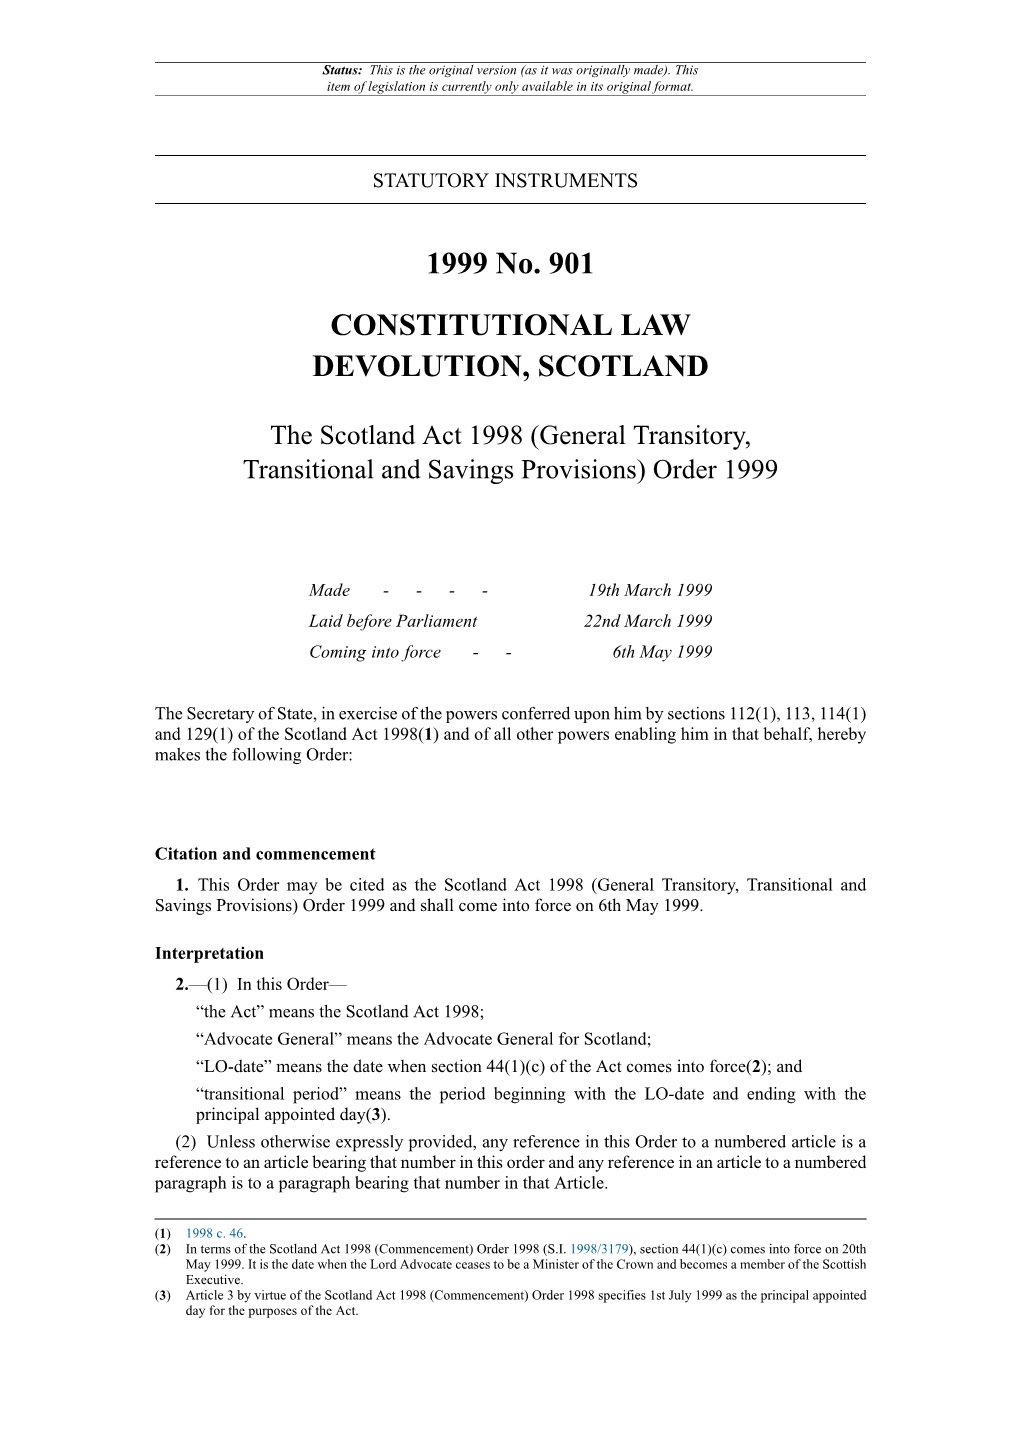 The Scotland Act 1998 (General Transitory, Transitional and Savings Provisions) Order 1999